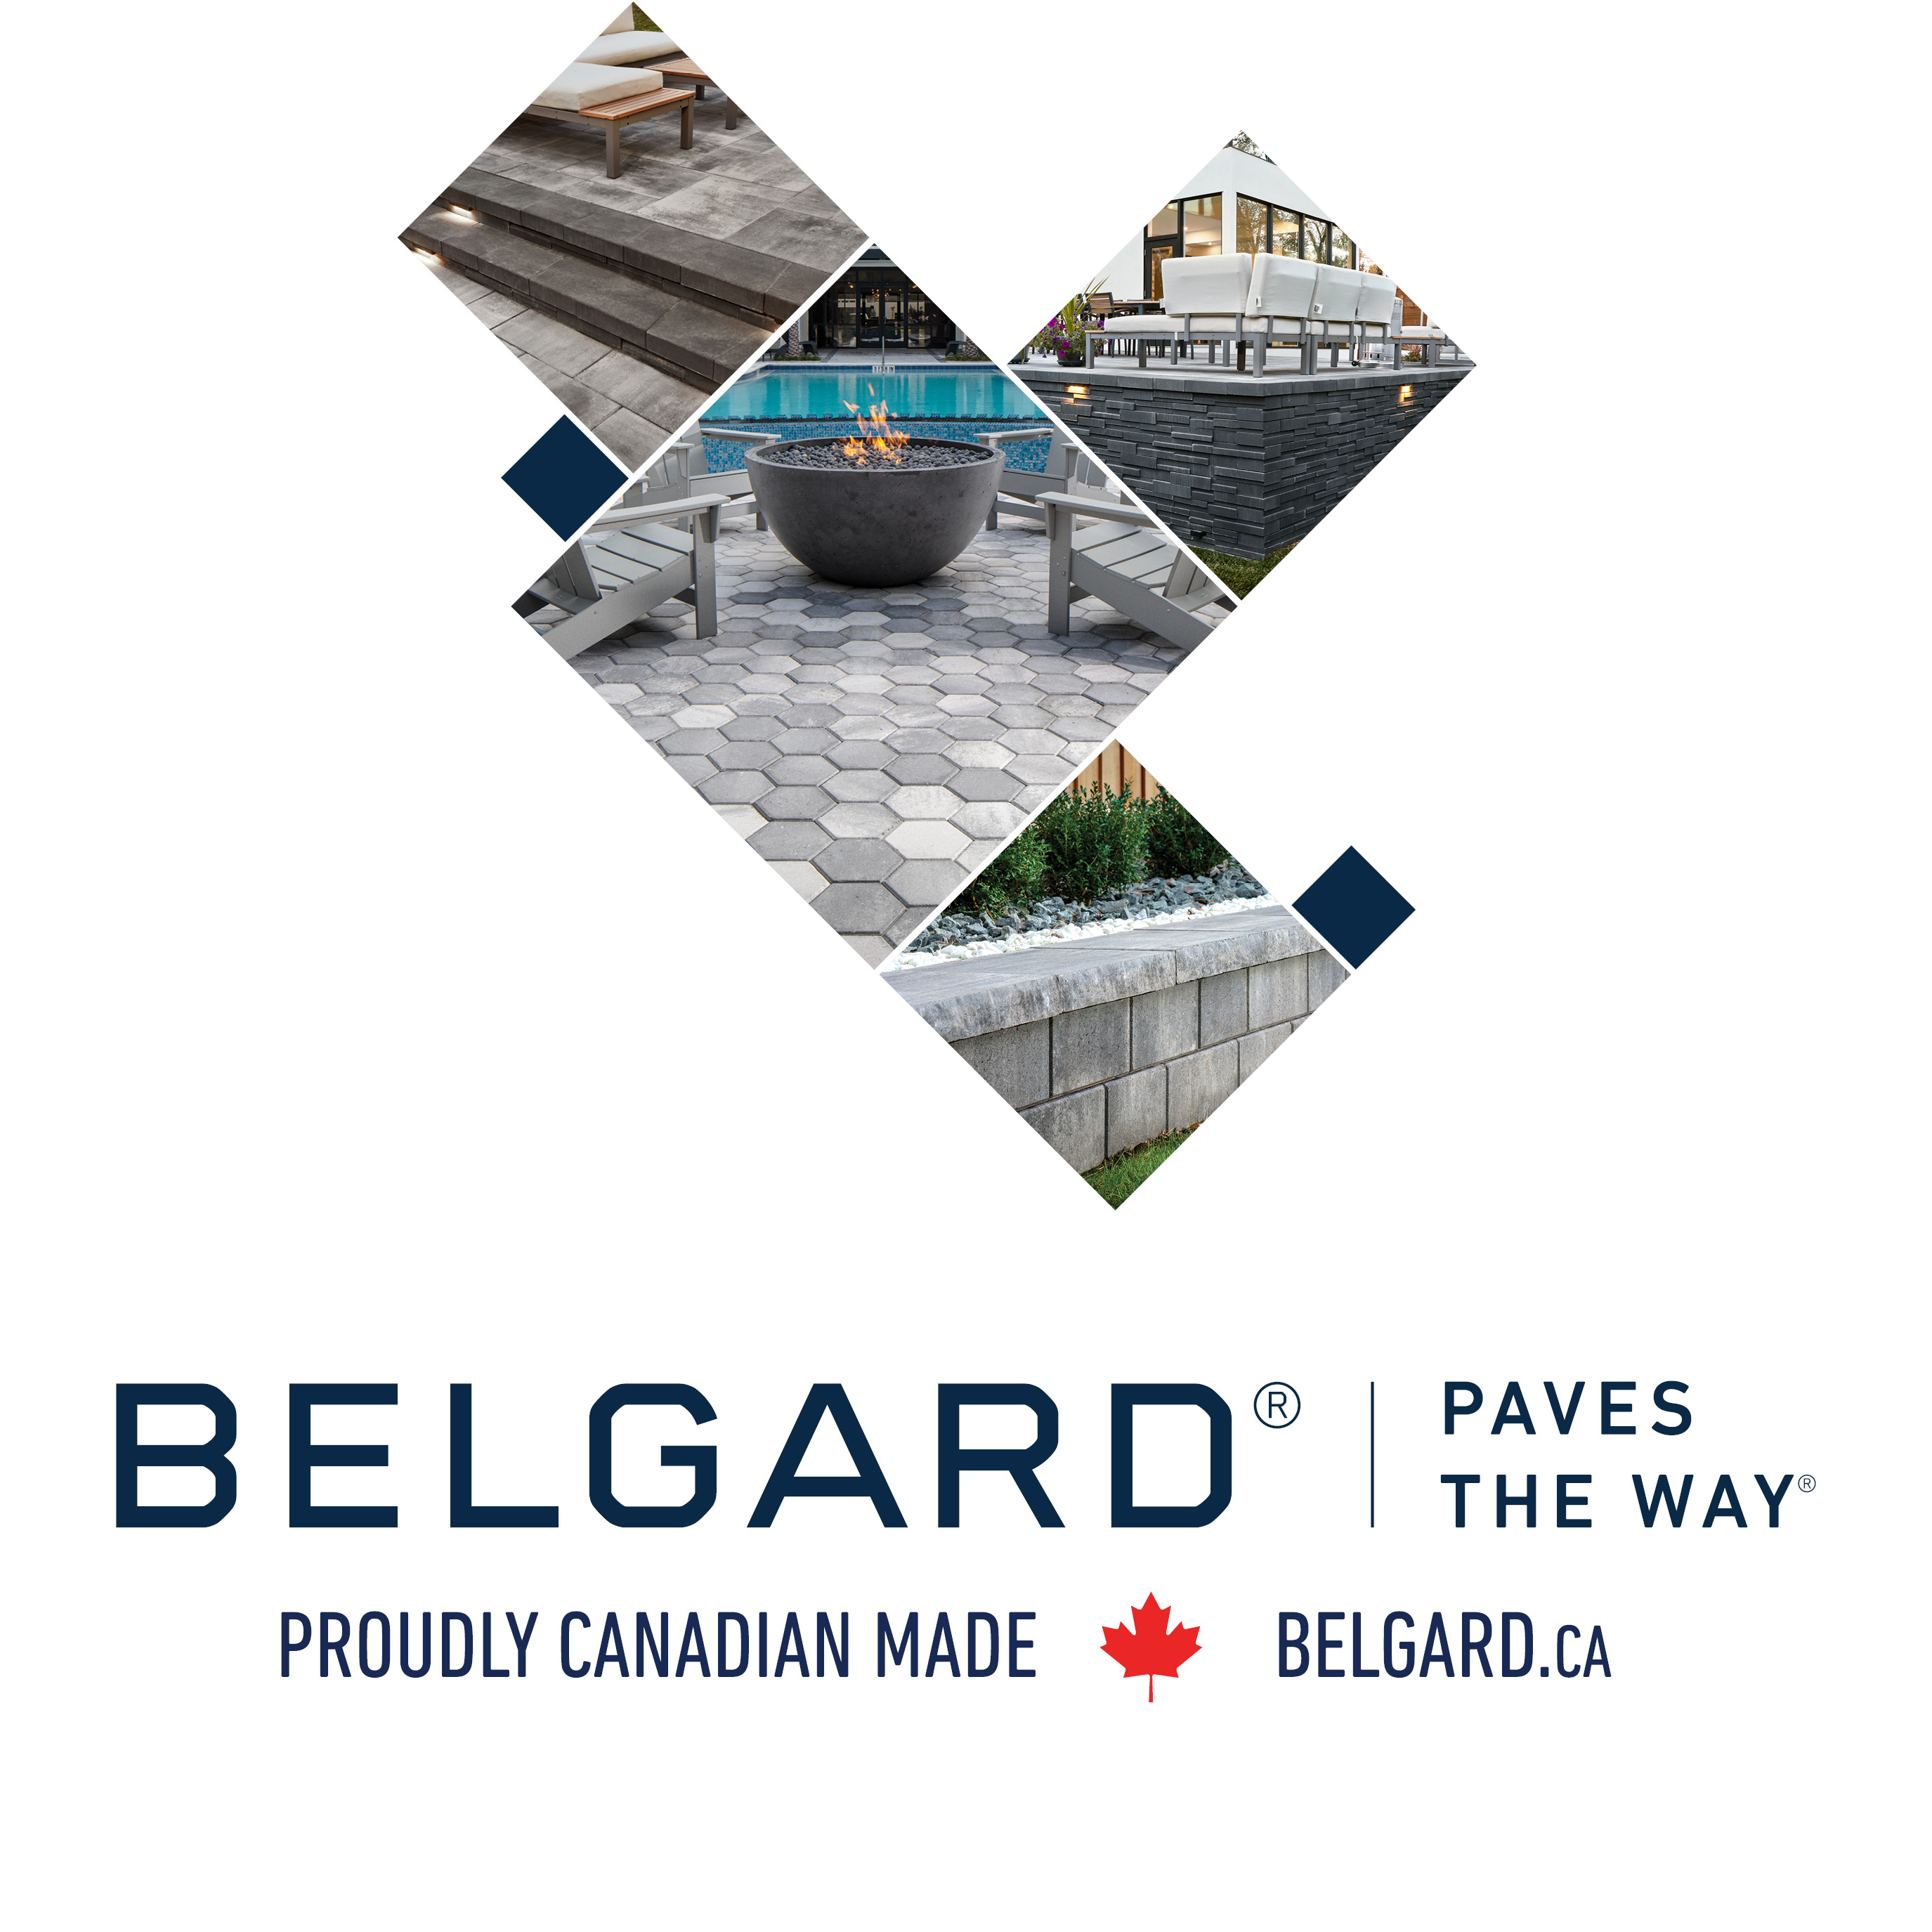 Abbotsford Concrete Products and Belgard